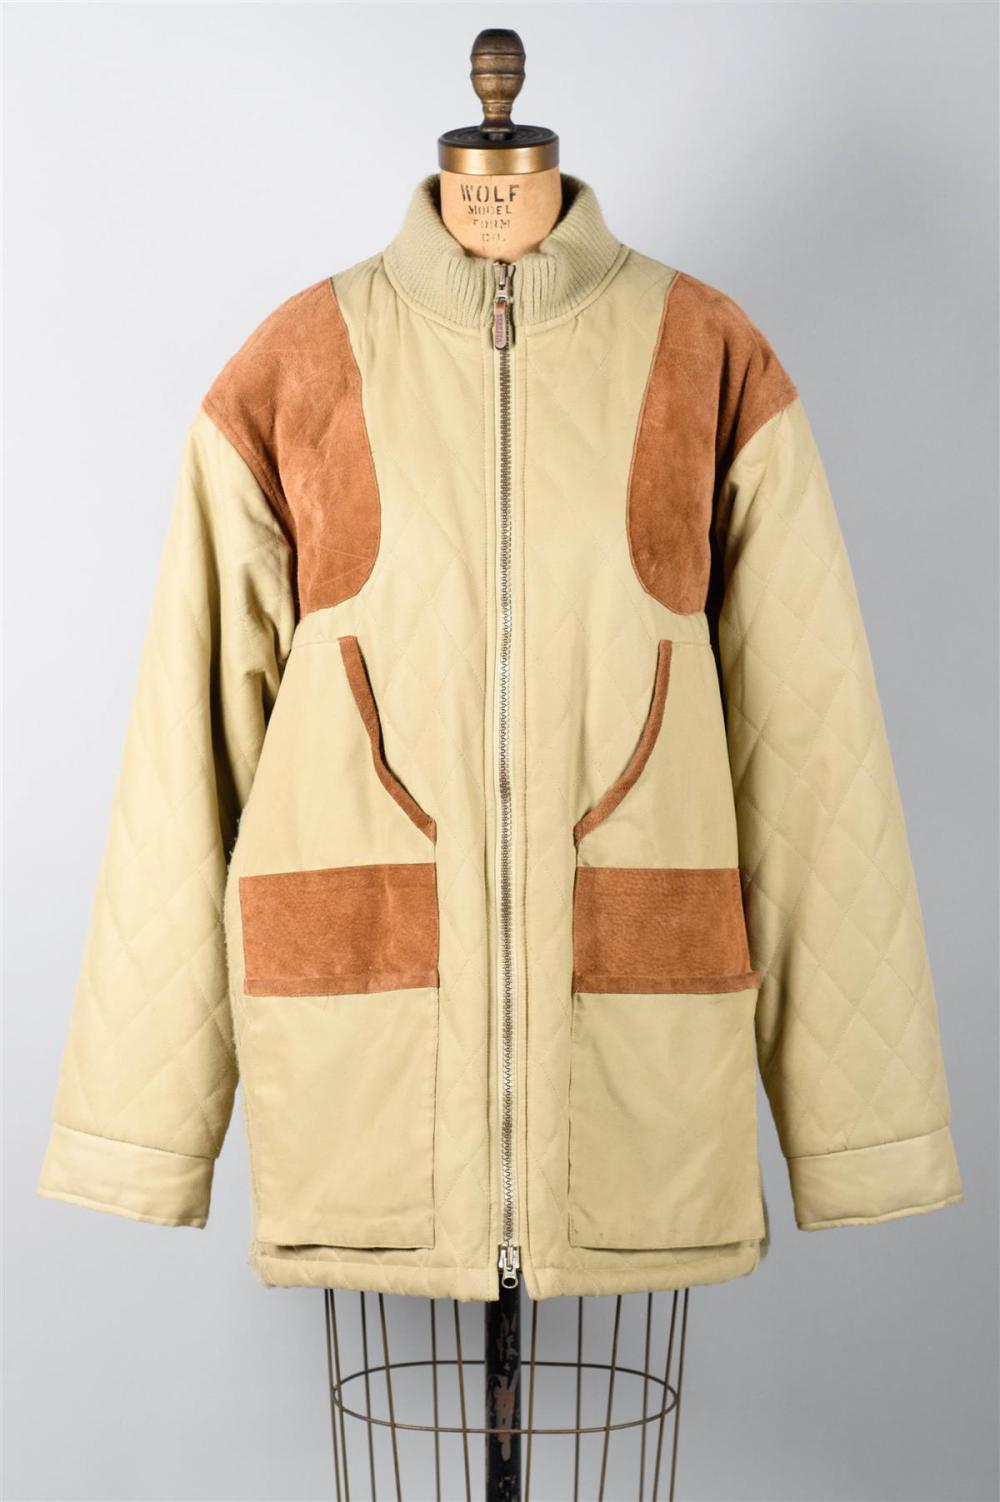 COLLECTION OF MEN'S HUNTING APPAREL,